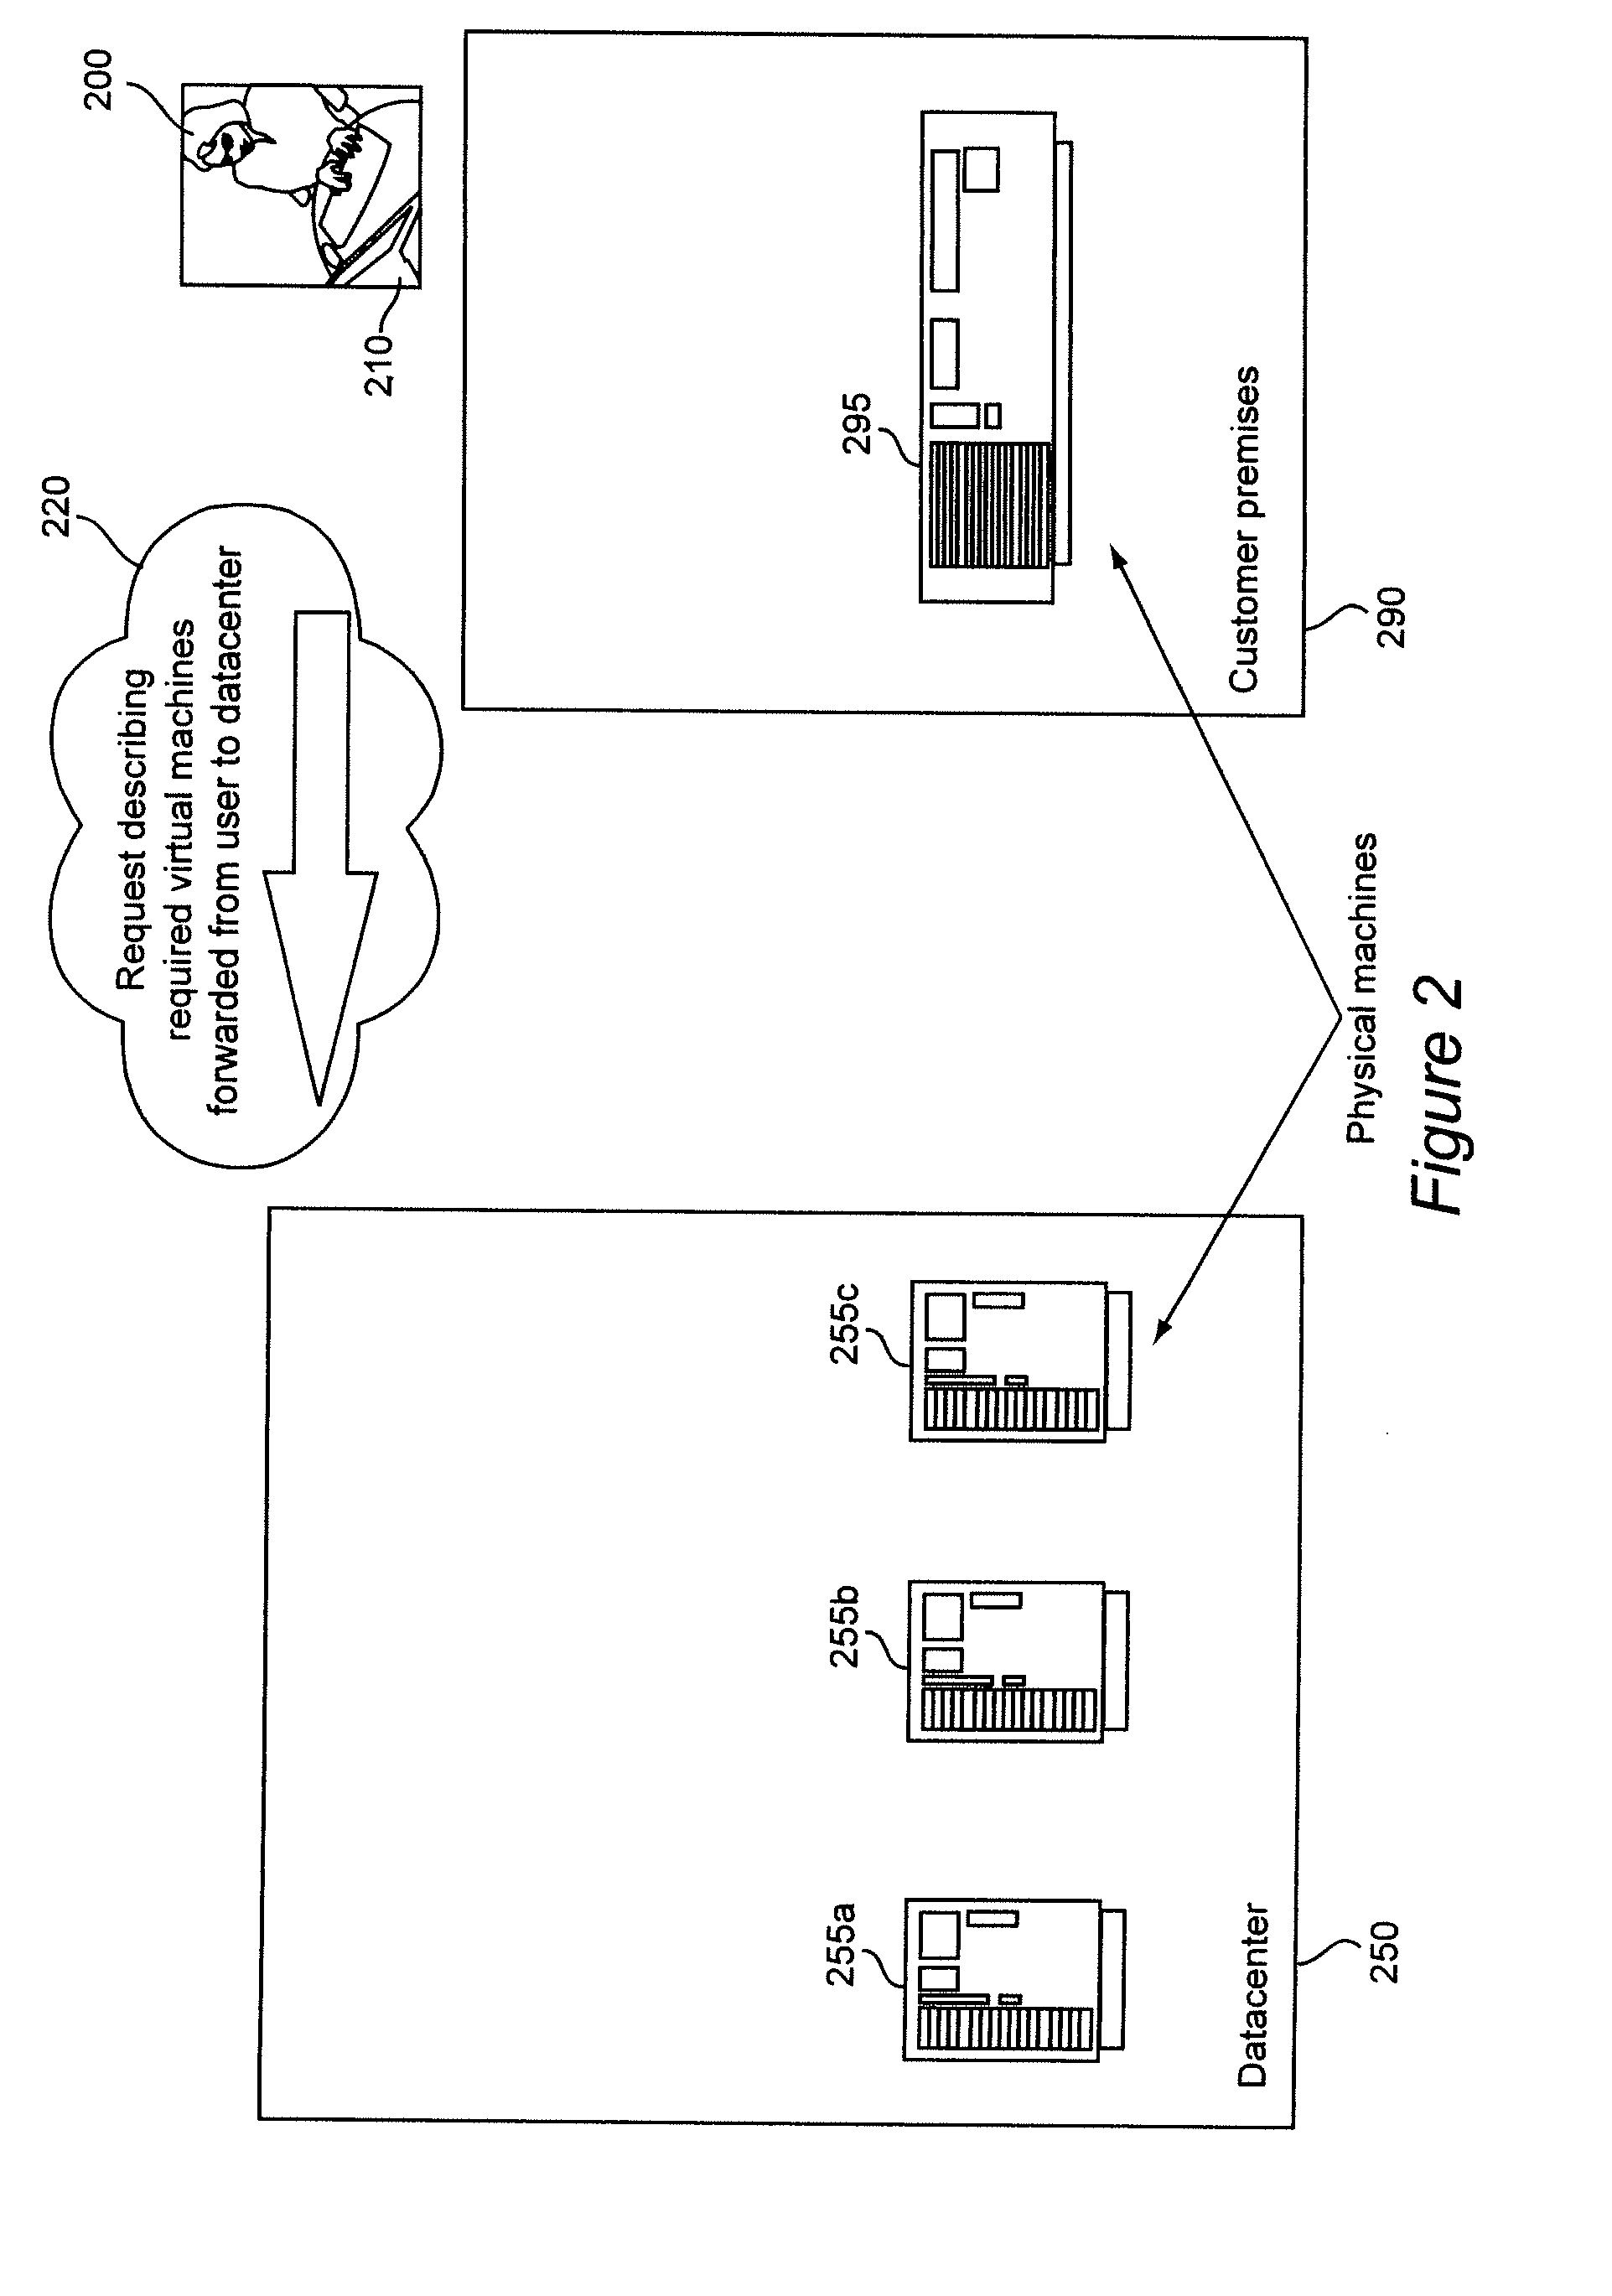 System and method for collaborative hosting of applications, virtual machines, and data objects